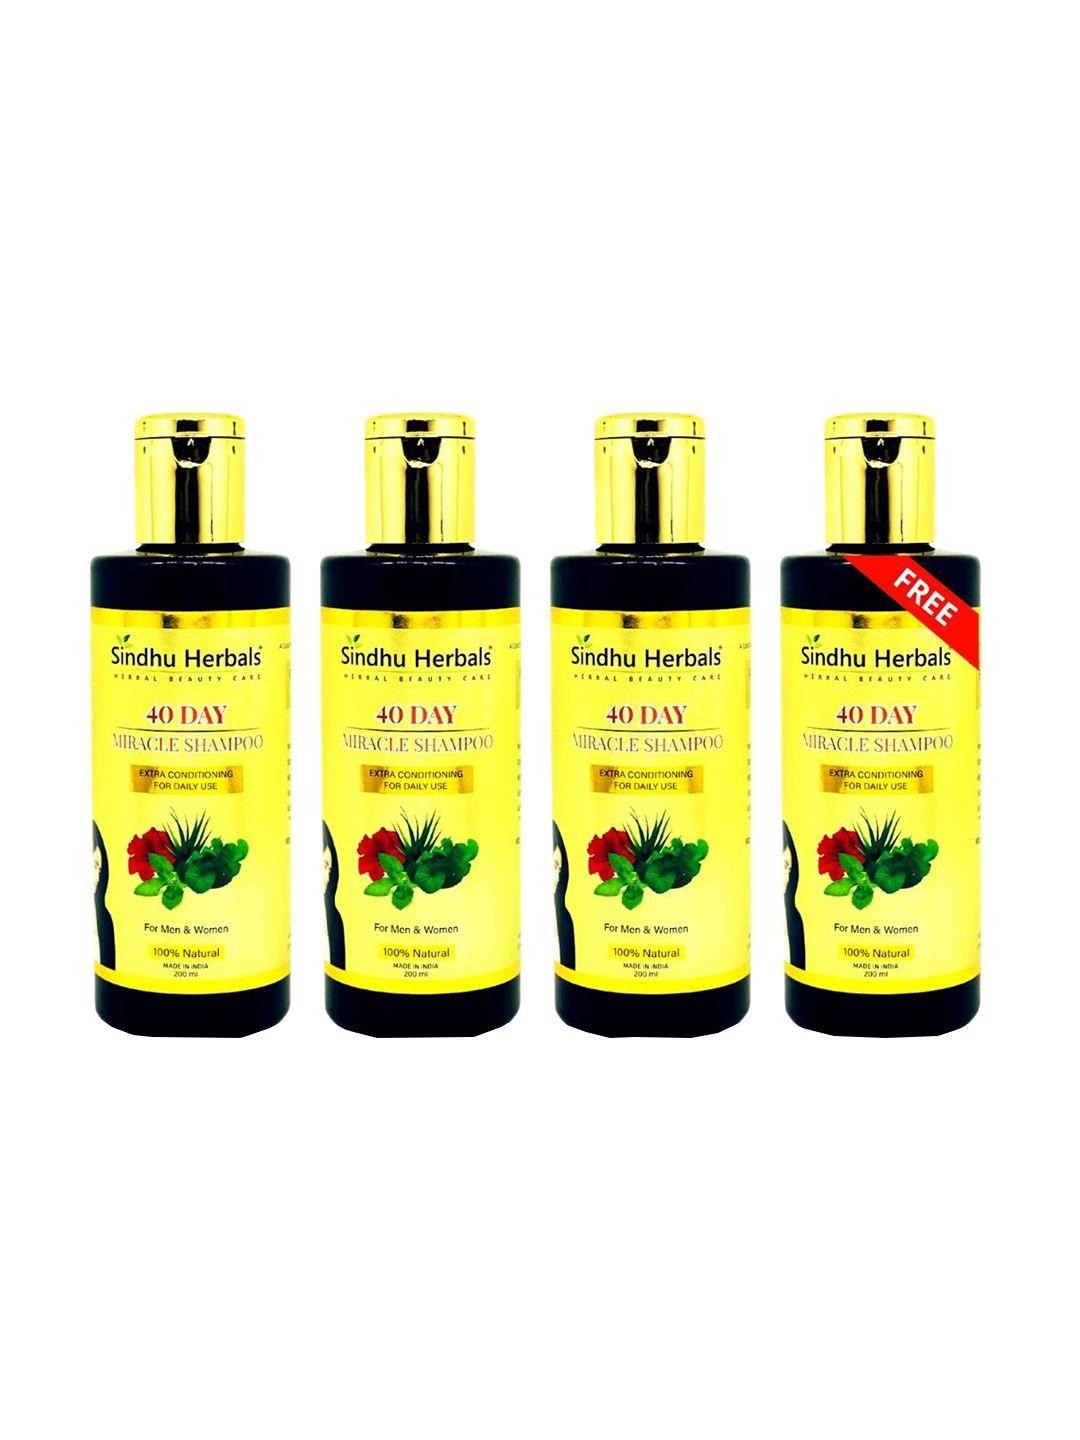 sindhu herbals buy 3 40-day miracle shampoos and get 1 shampoo free